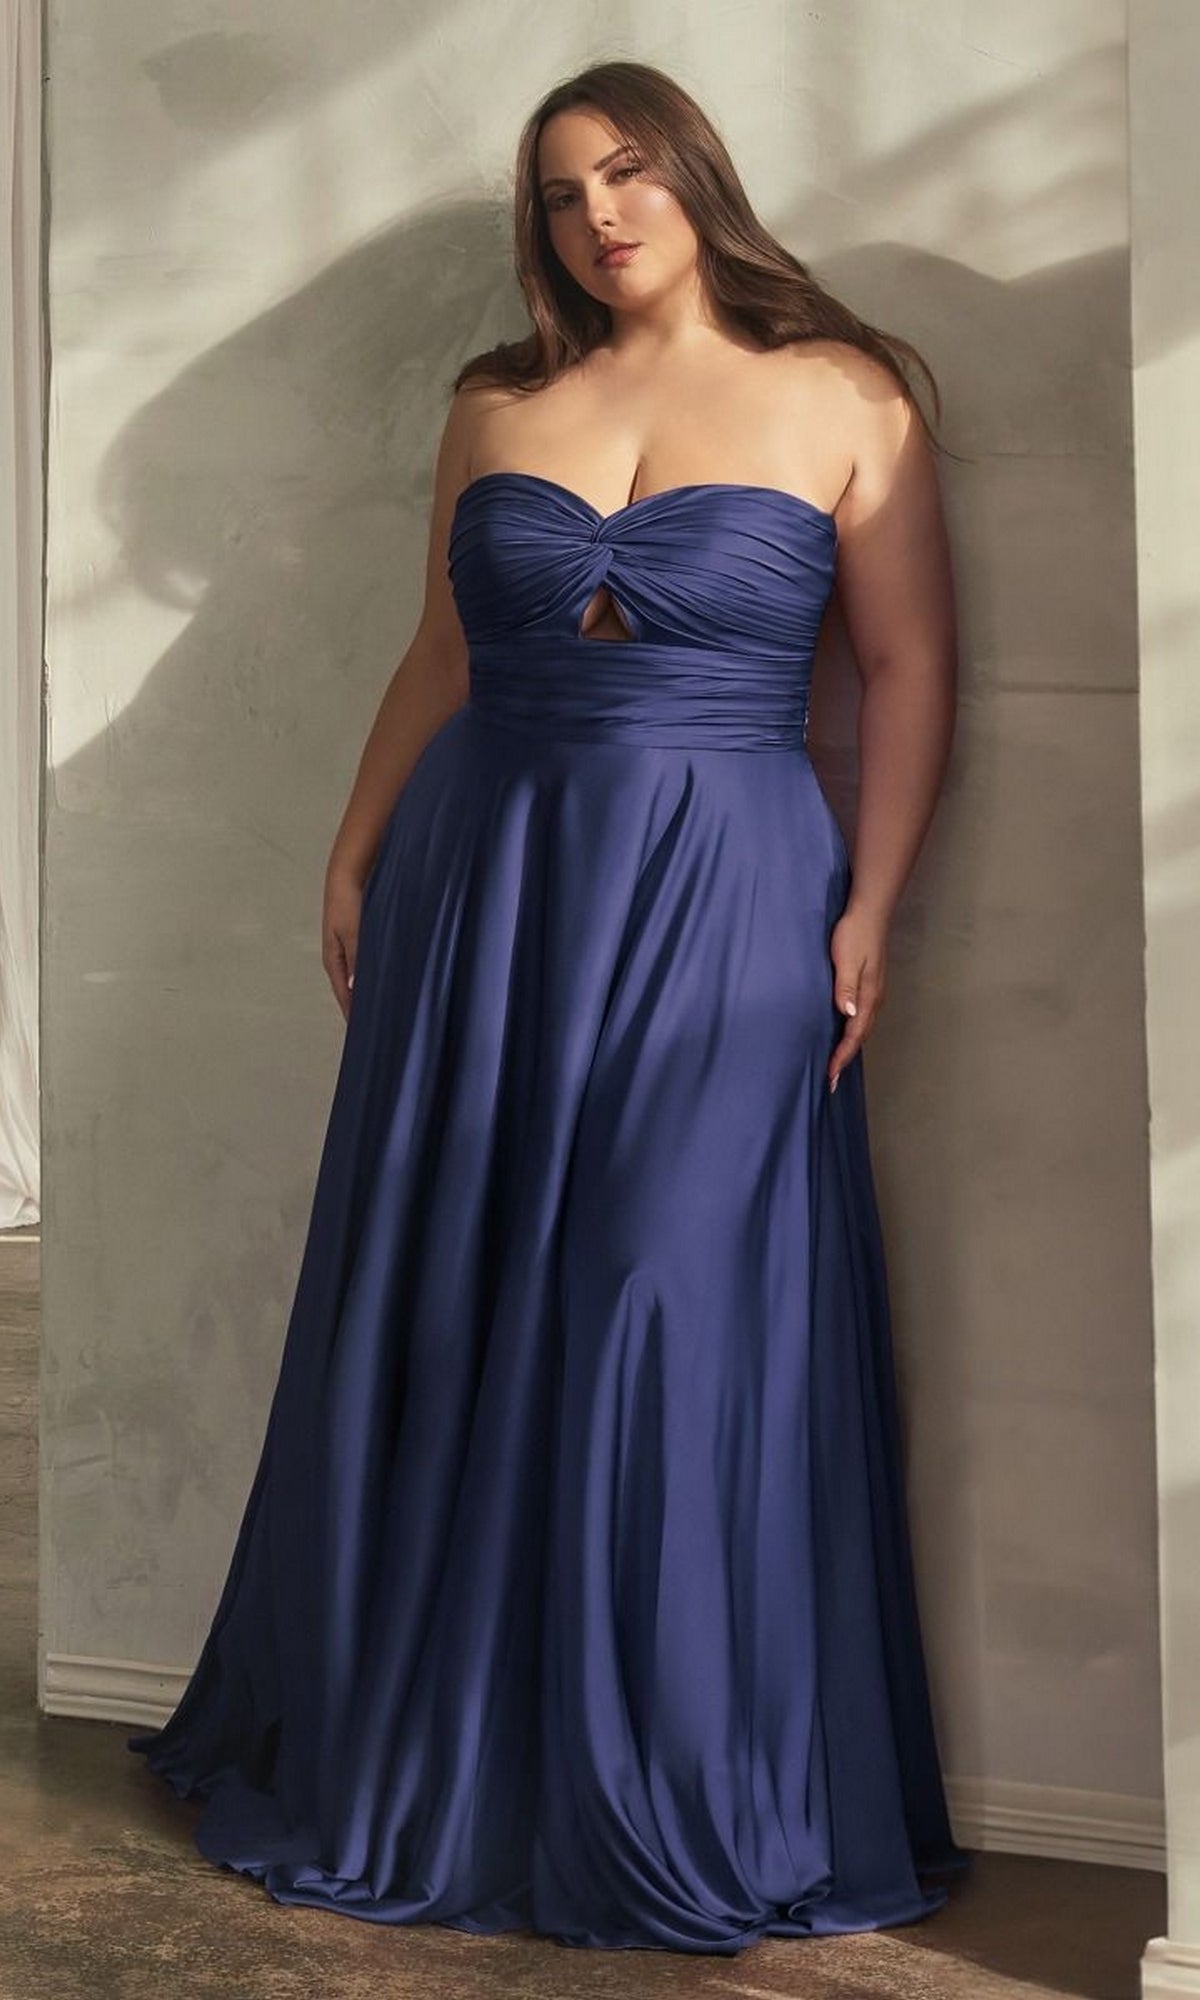 Plus-Size Strapless Sweetheart Prom Dress 7496C